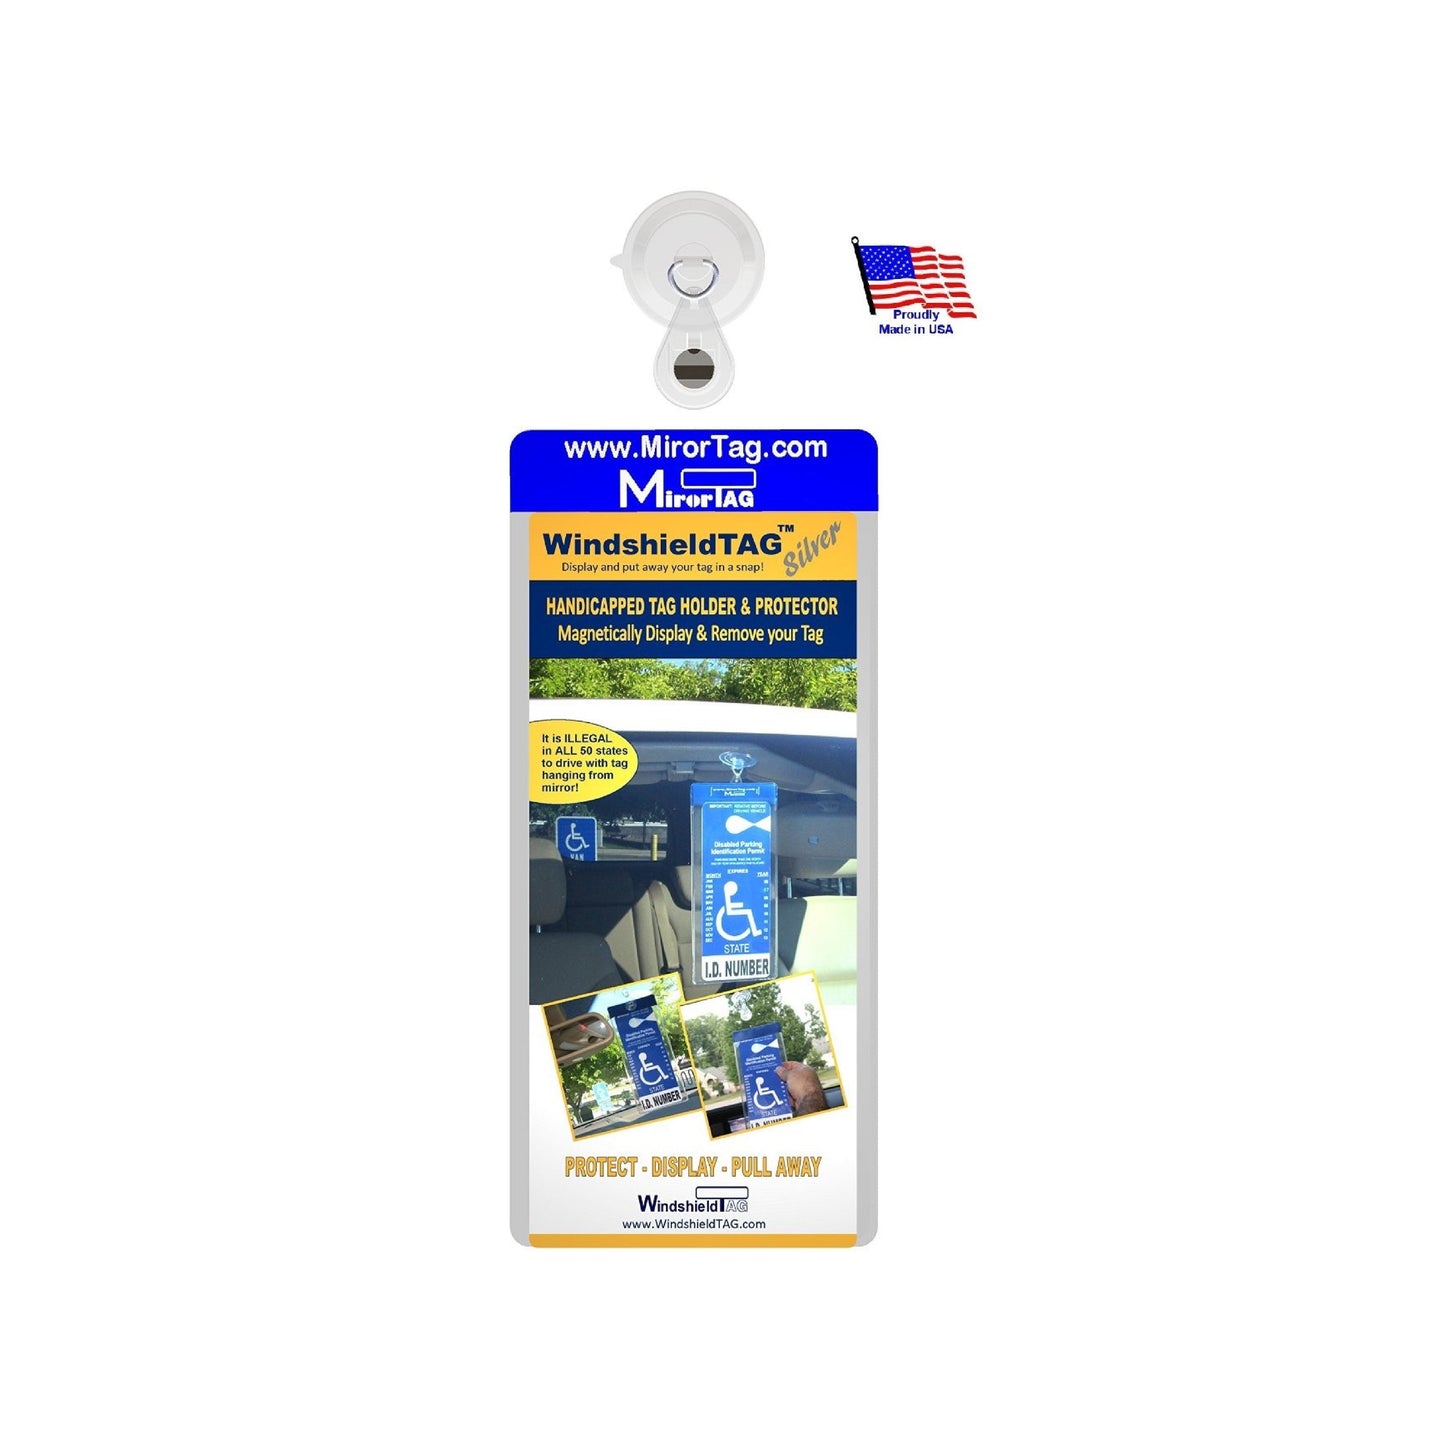 Handicap parking placard holder and protector, windshieldtag by JL Safety